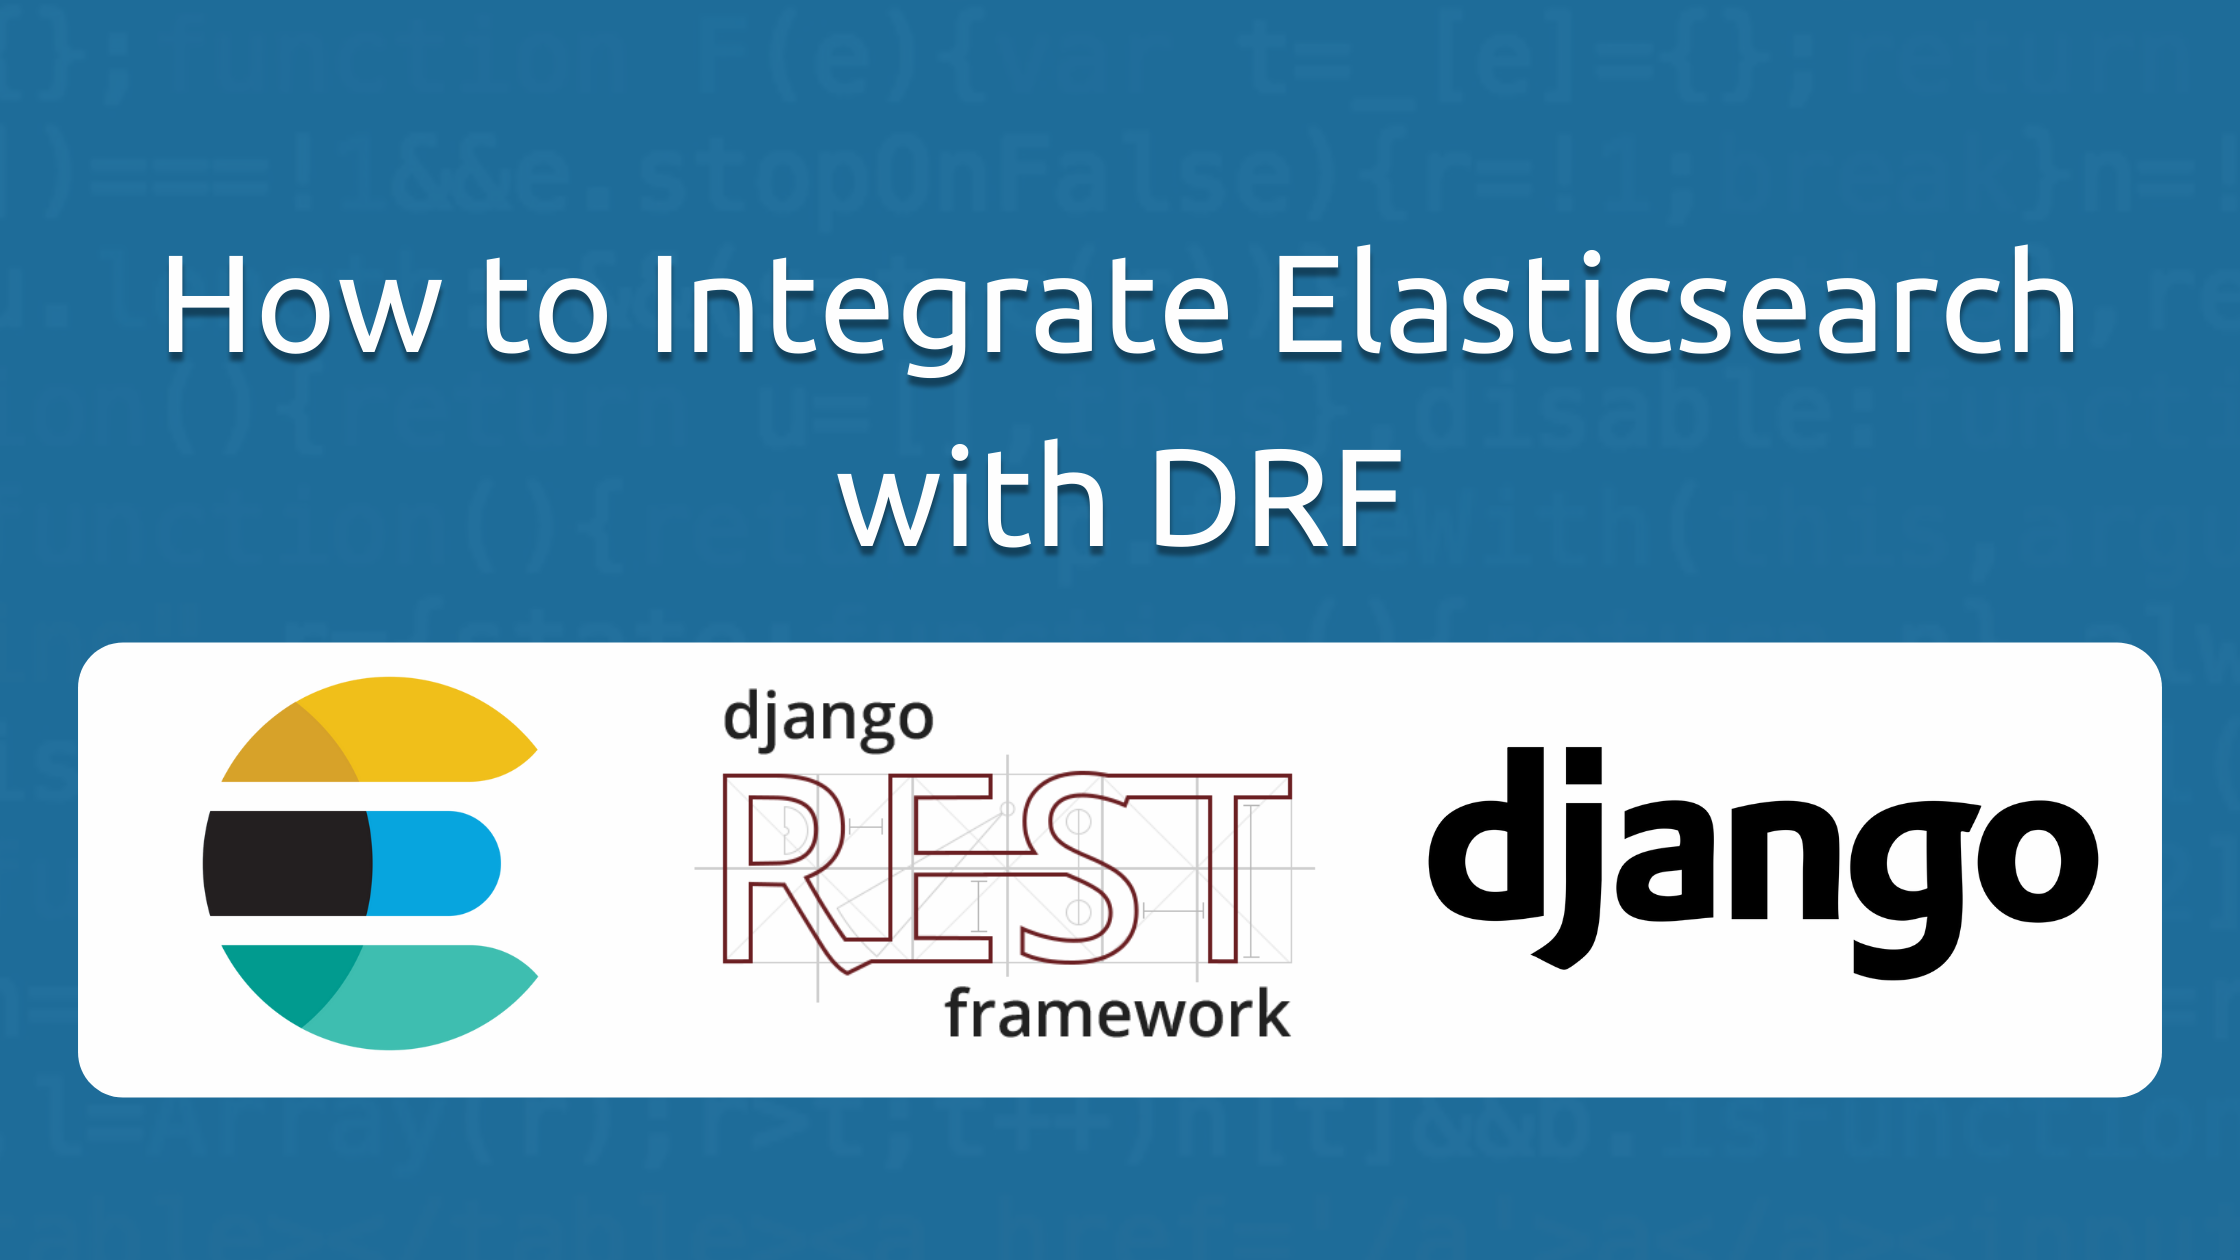 How to Integrate Elasticsearch with DRF